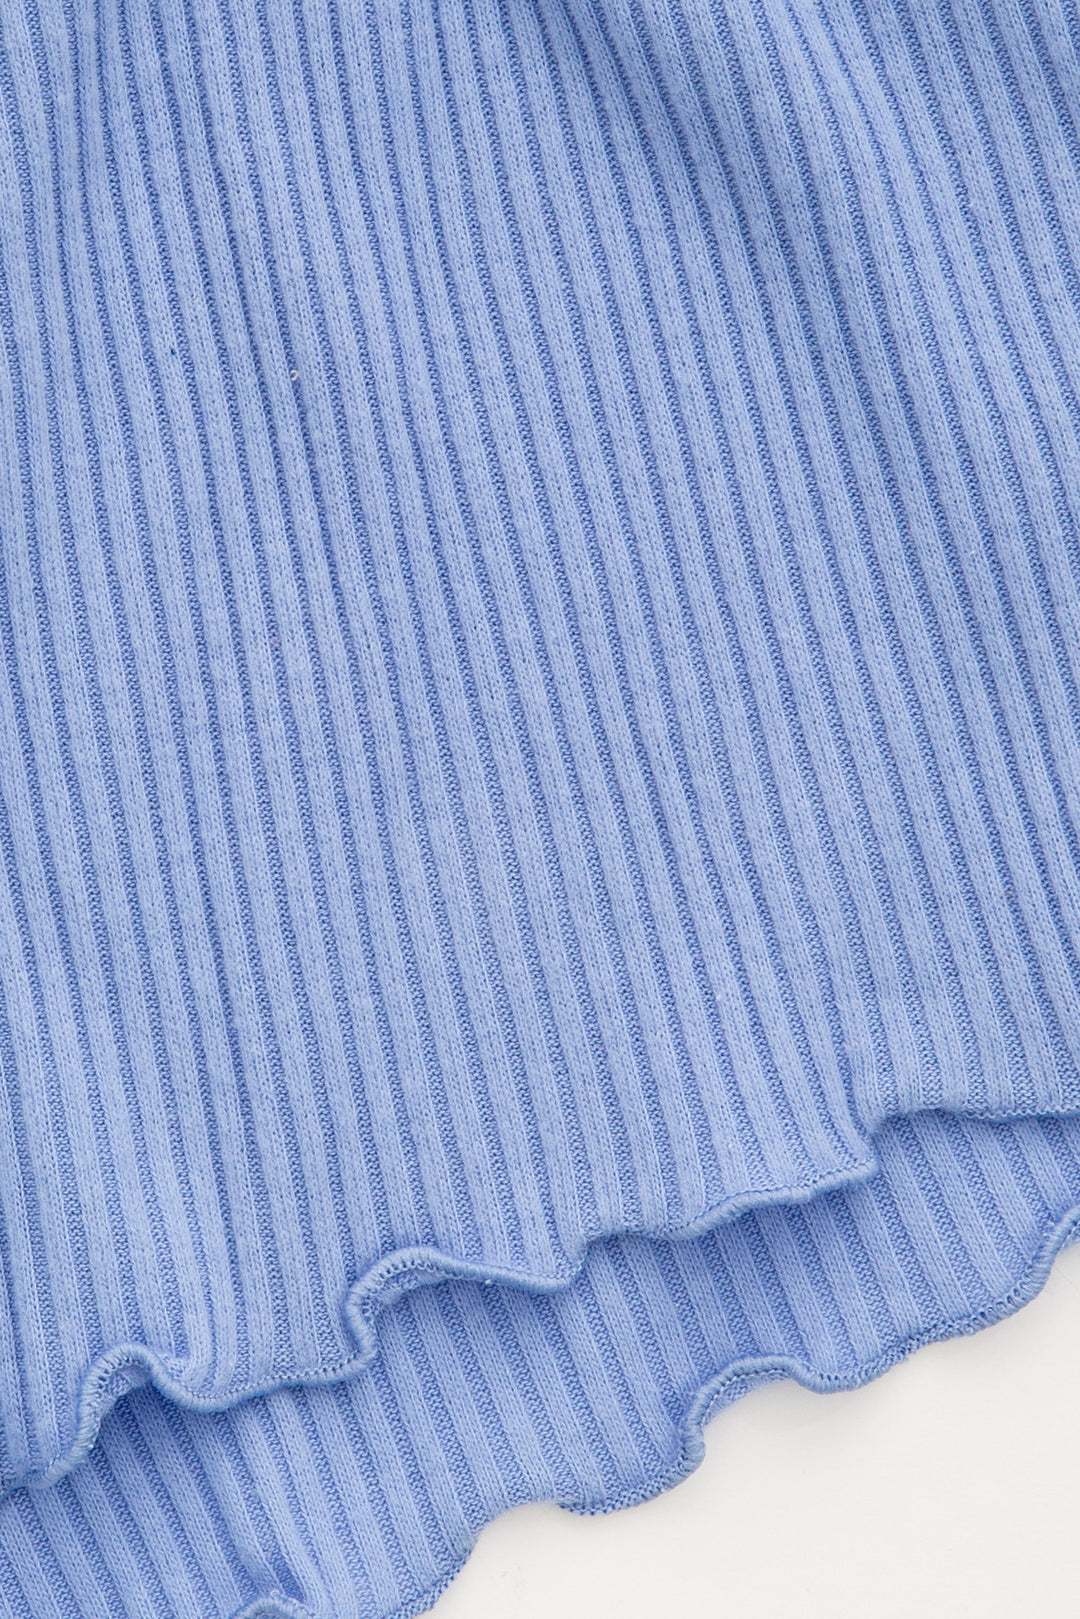 Periwinkle rib sleep short in Repreve x Reloved recycled soft knit. Mini snap fly & curly merrow hem. (7325665656932)